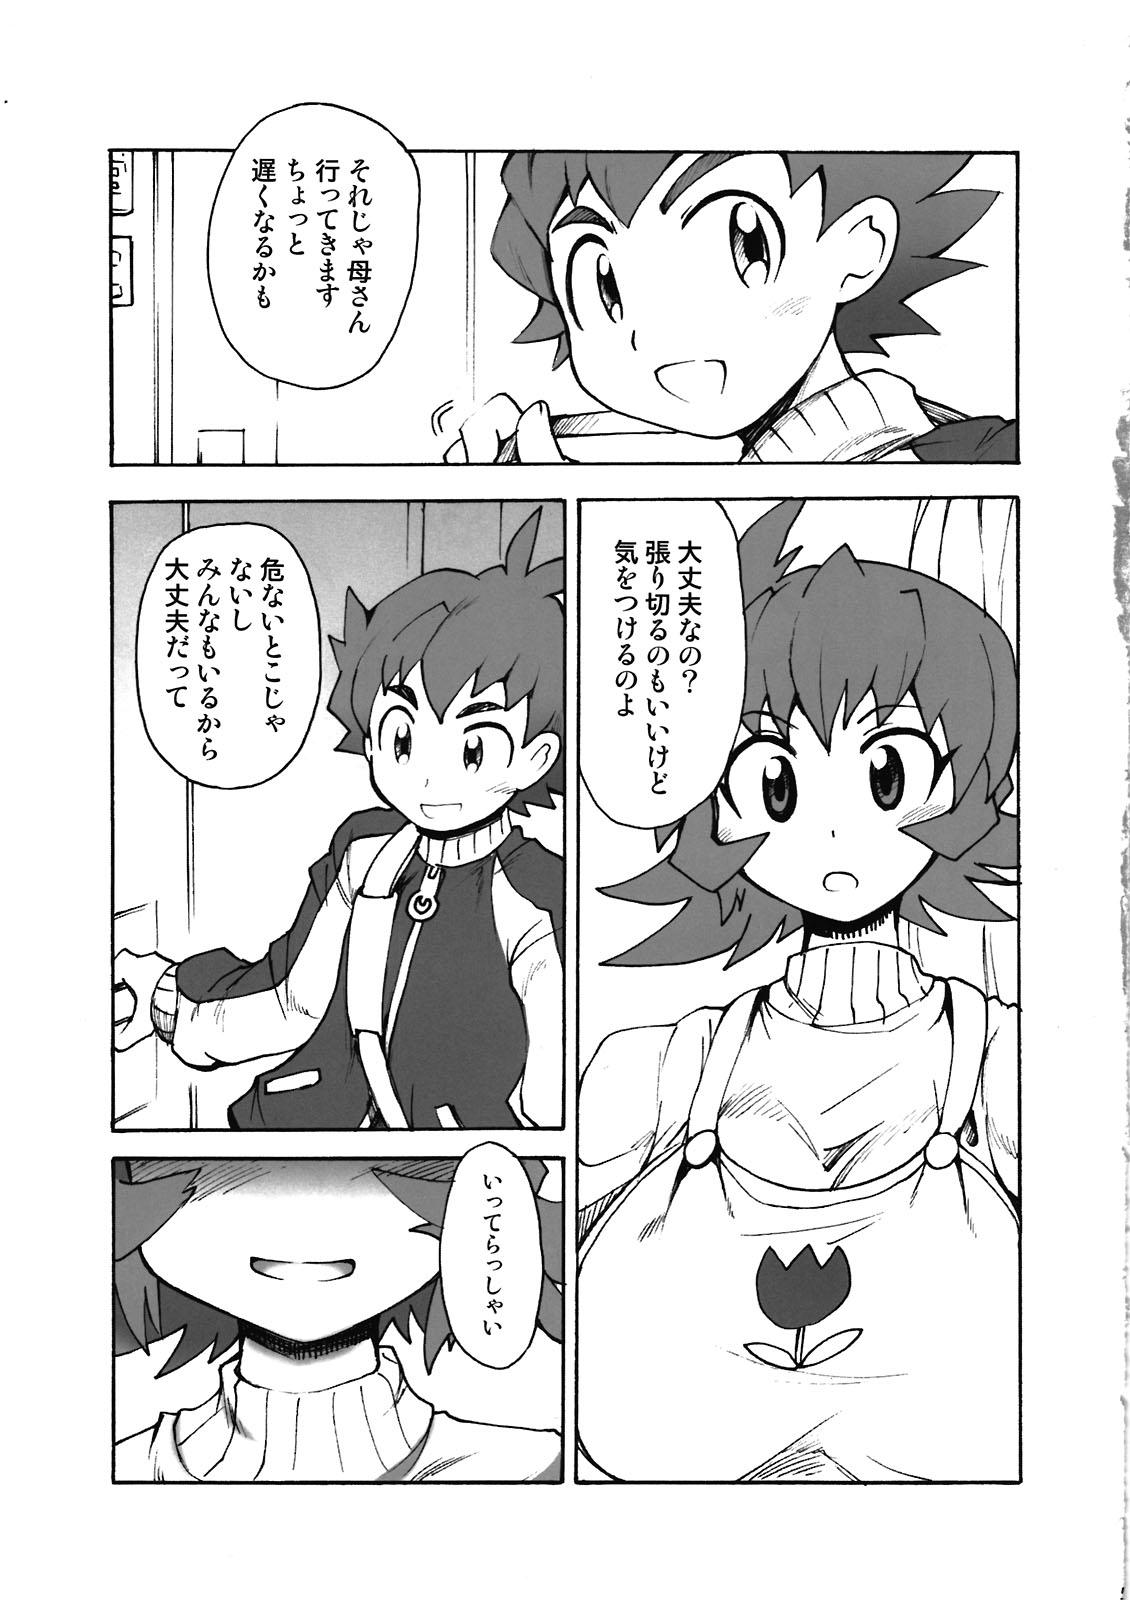 Ass Fucking UNLIMITED Boost - Danball senki 18 Year Old - Page 5